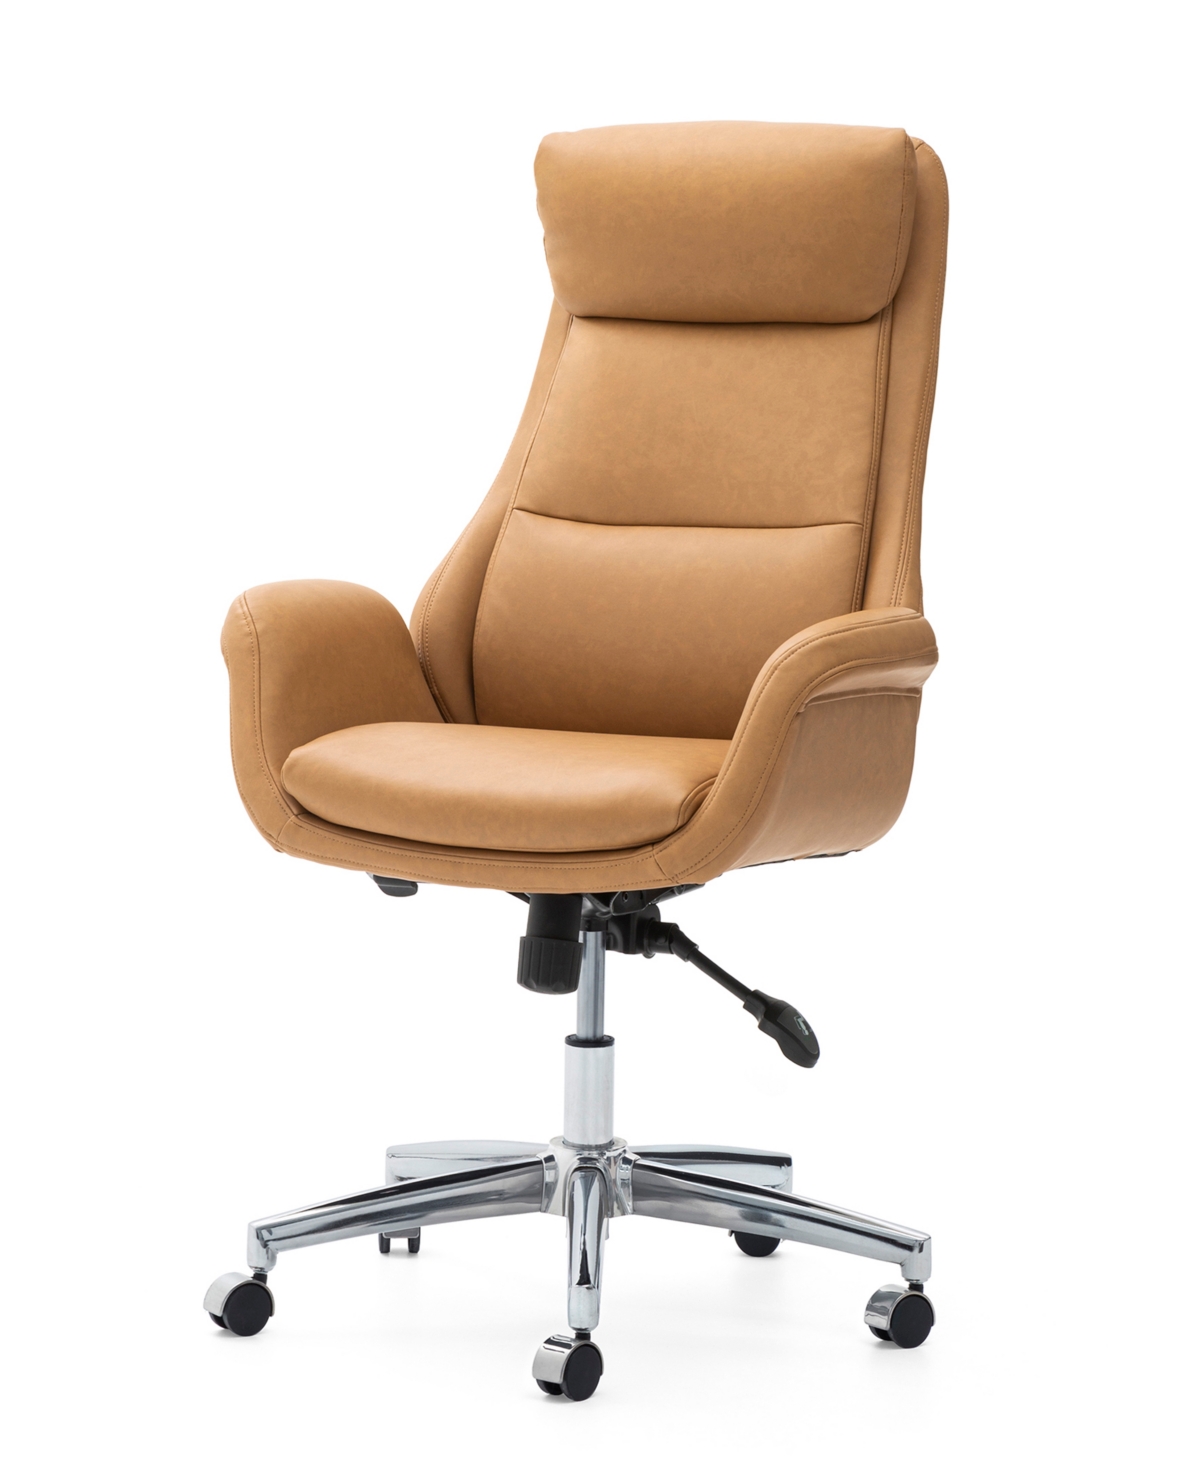 Glitzhome 47.75" H Mid-century Modern Leatherette Gaslift Adjustable Swivel High Back Office Chair In Camel